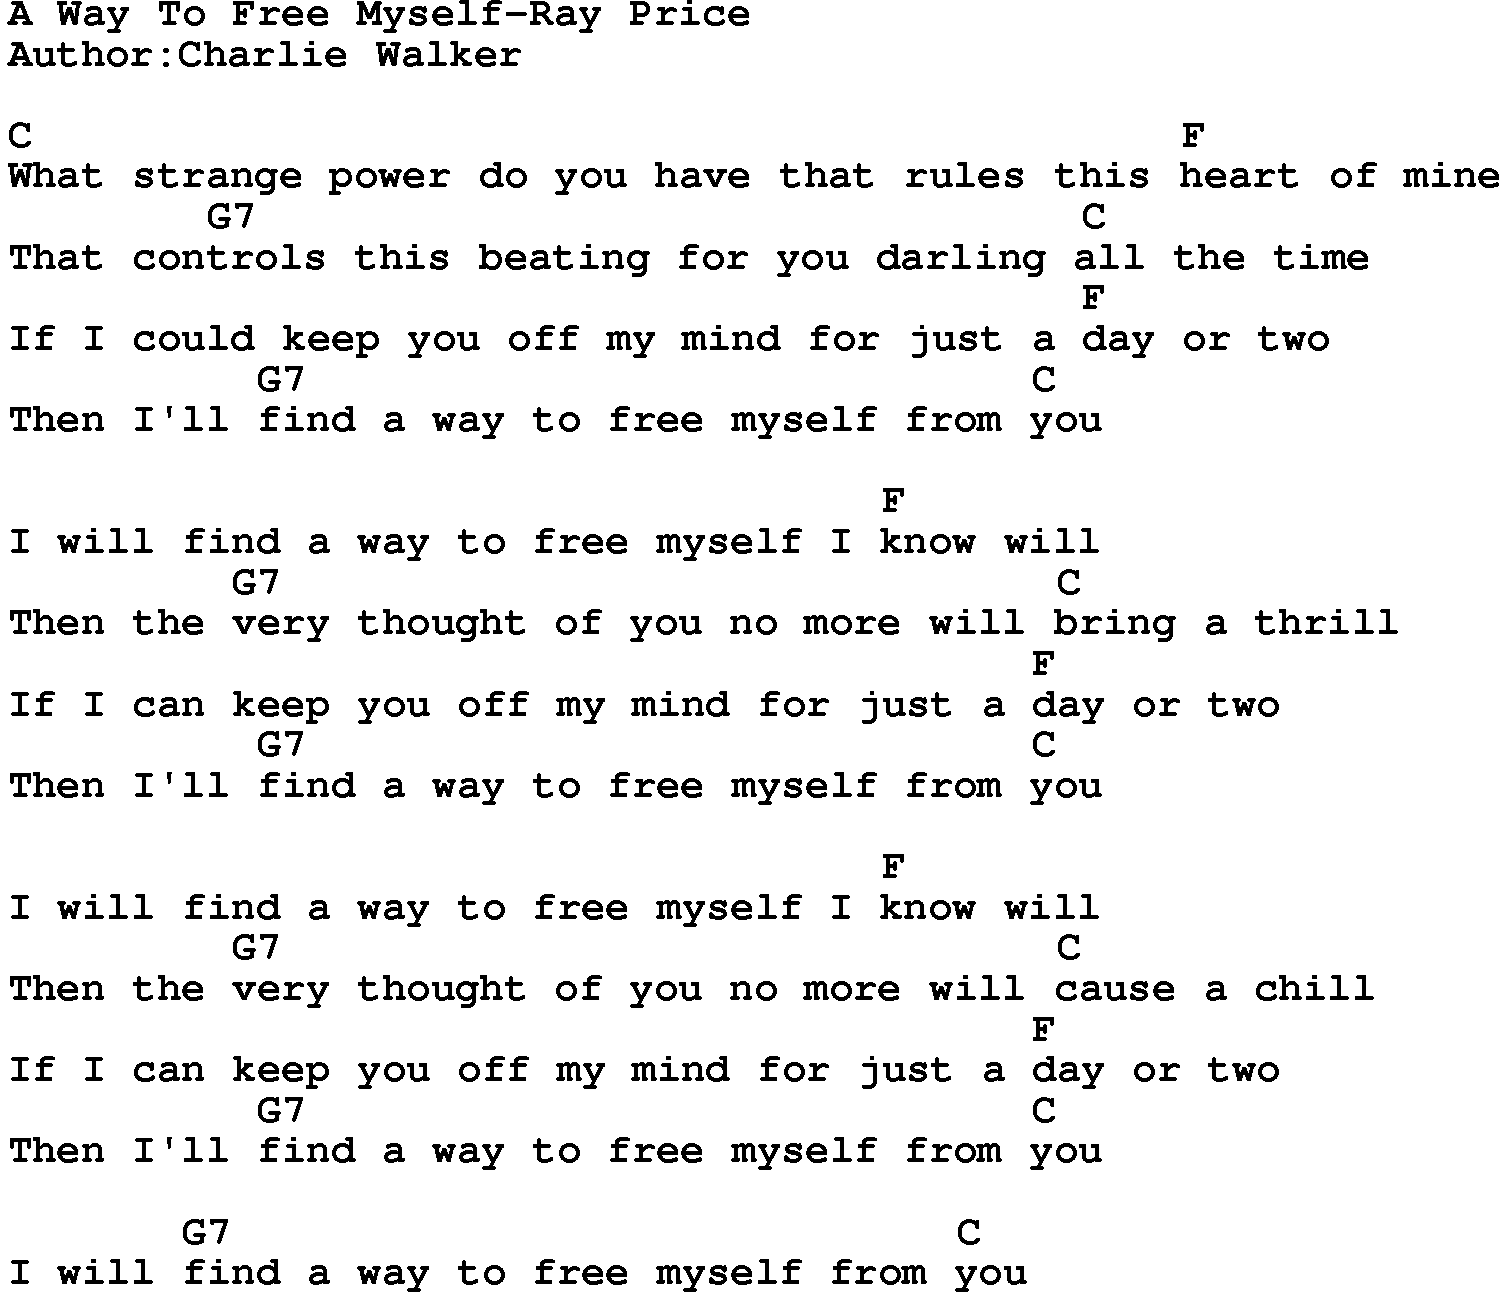 Country music song: A Way To Free Myself-Ray Price lyrics and chords